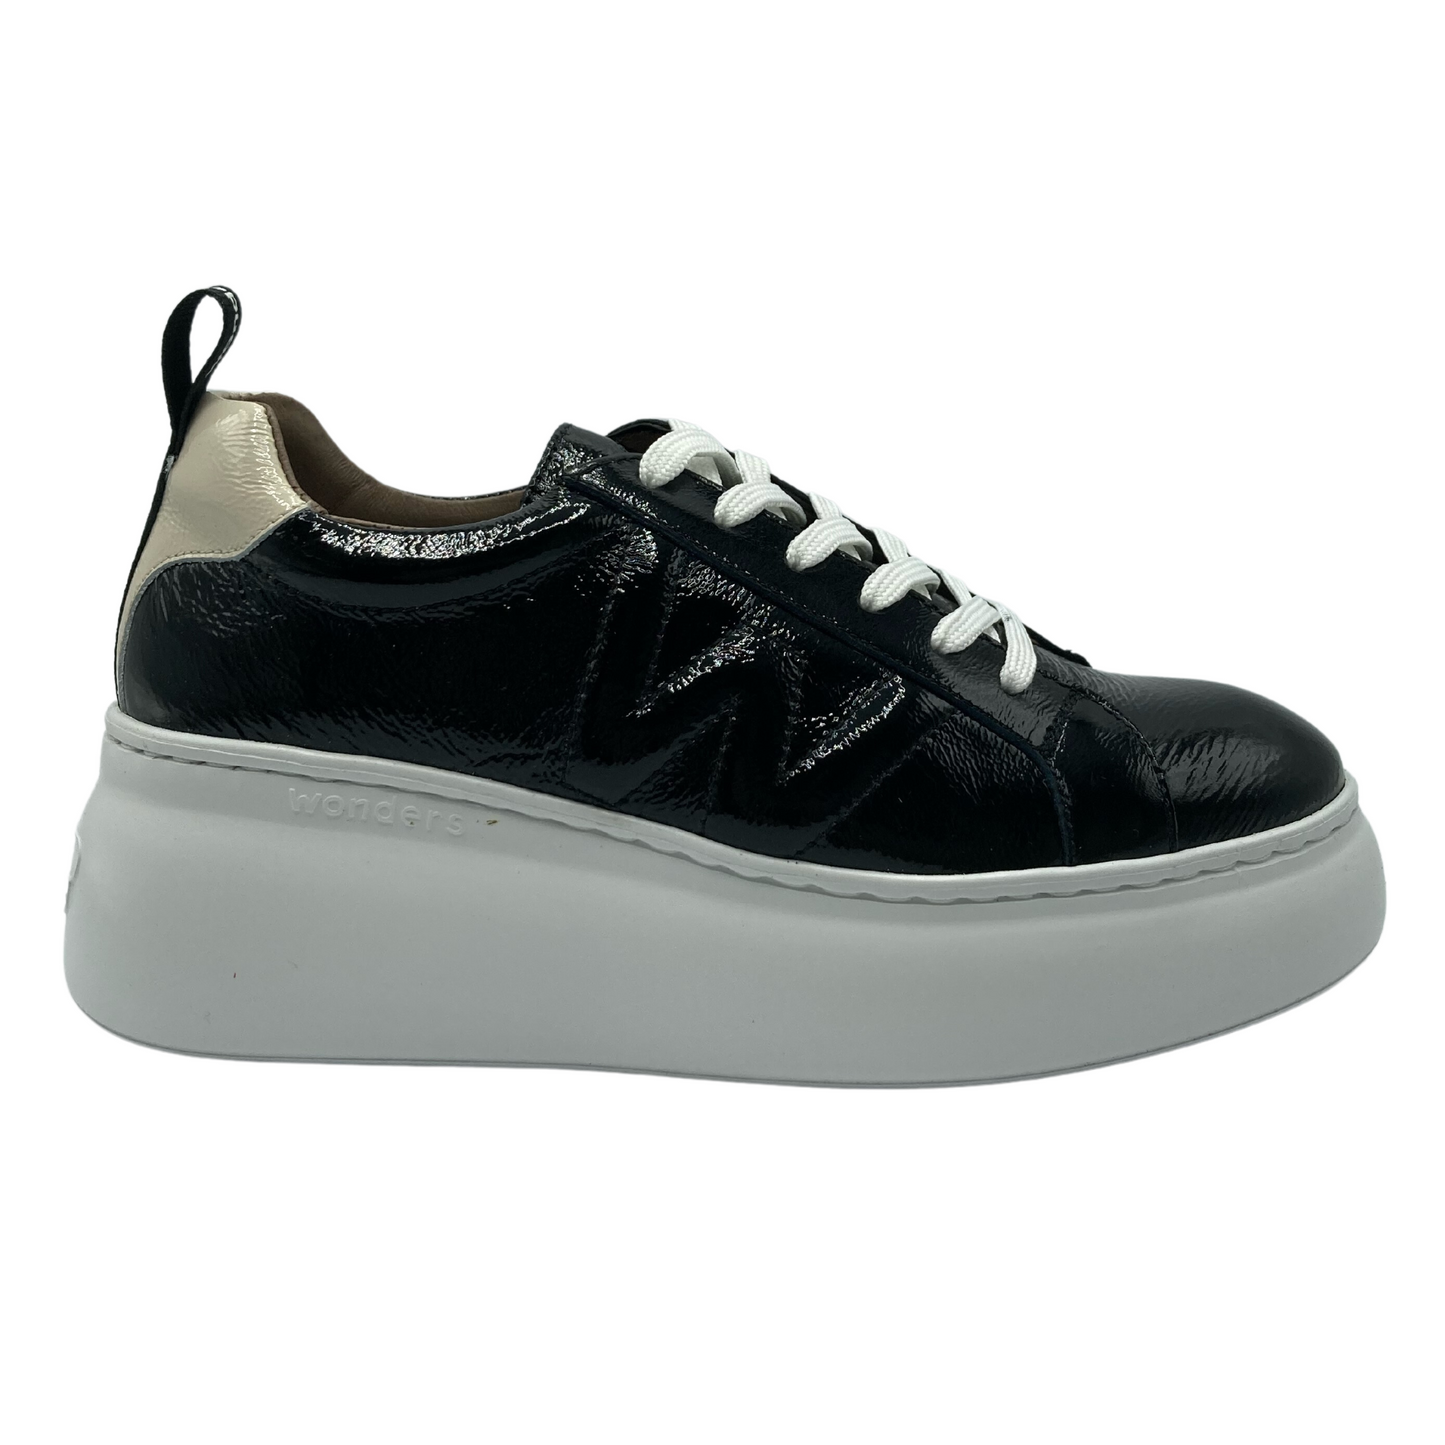 A black patent sneaker with a white platform sole is pictured. There is a cream patent detail on the back of the heel. This sneaker has white lacing.